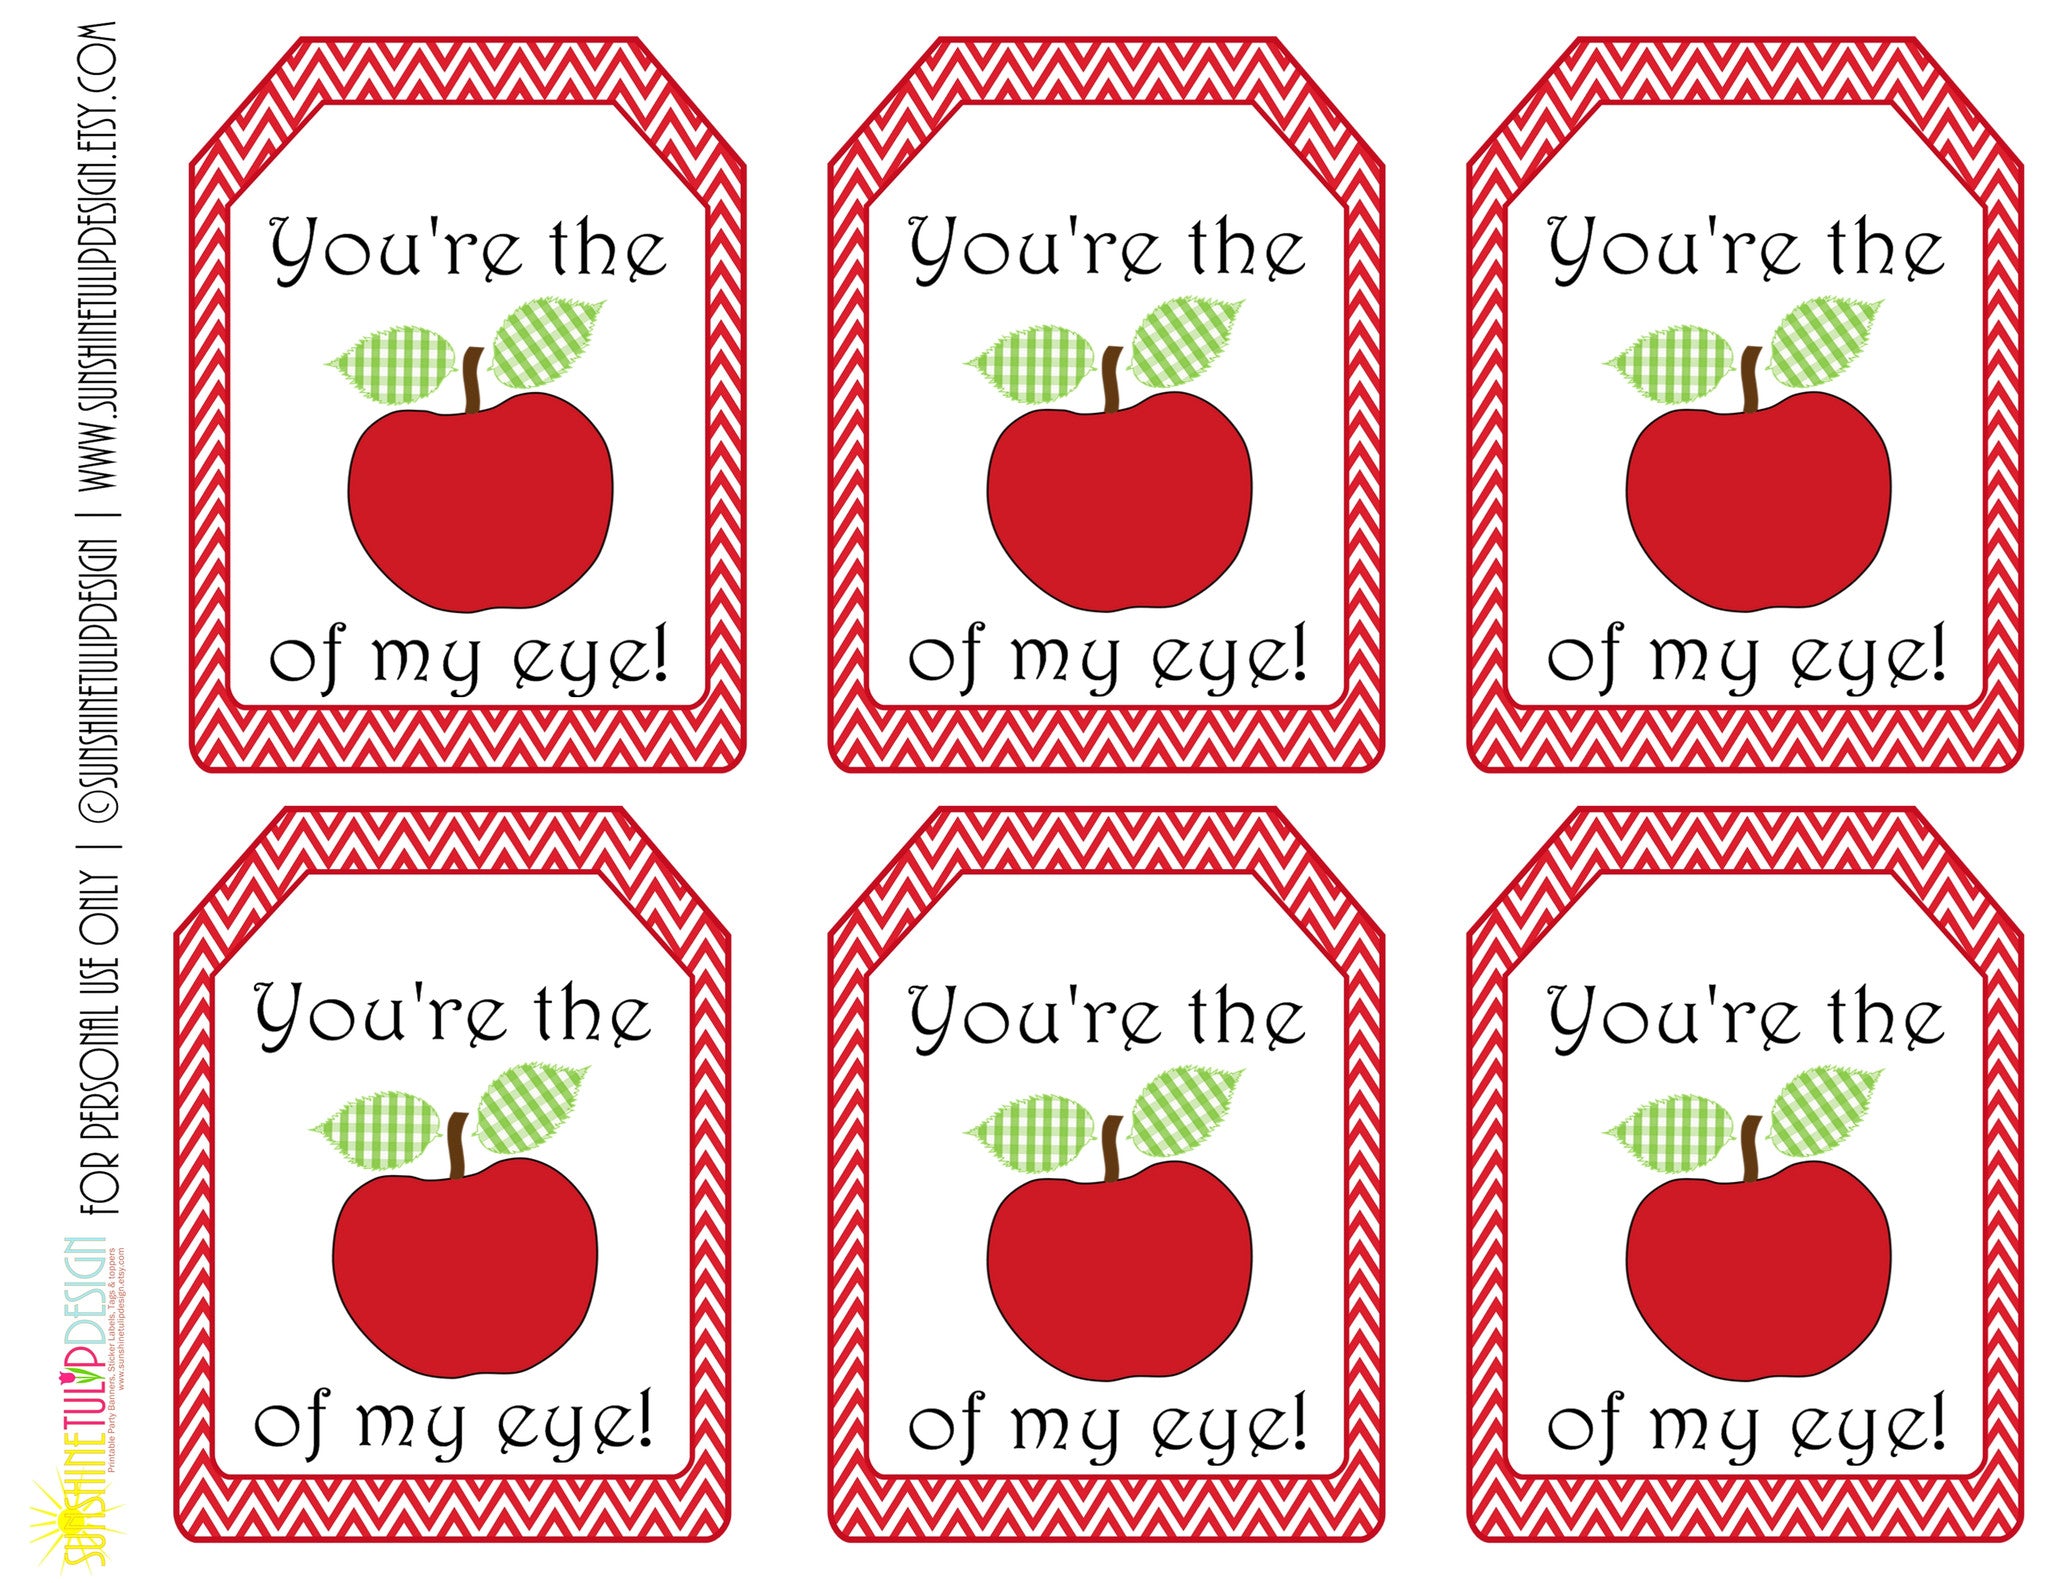 Printable Teacher Appreciation Gift Tags You're the Apple of my Eye by